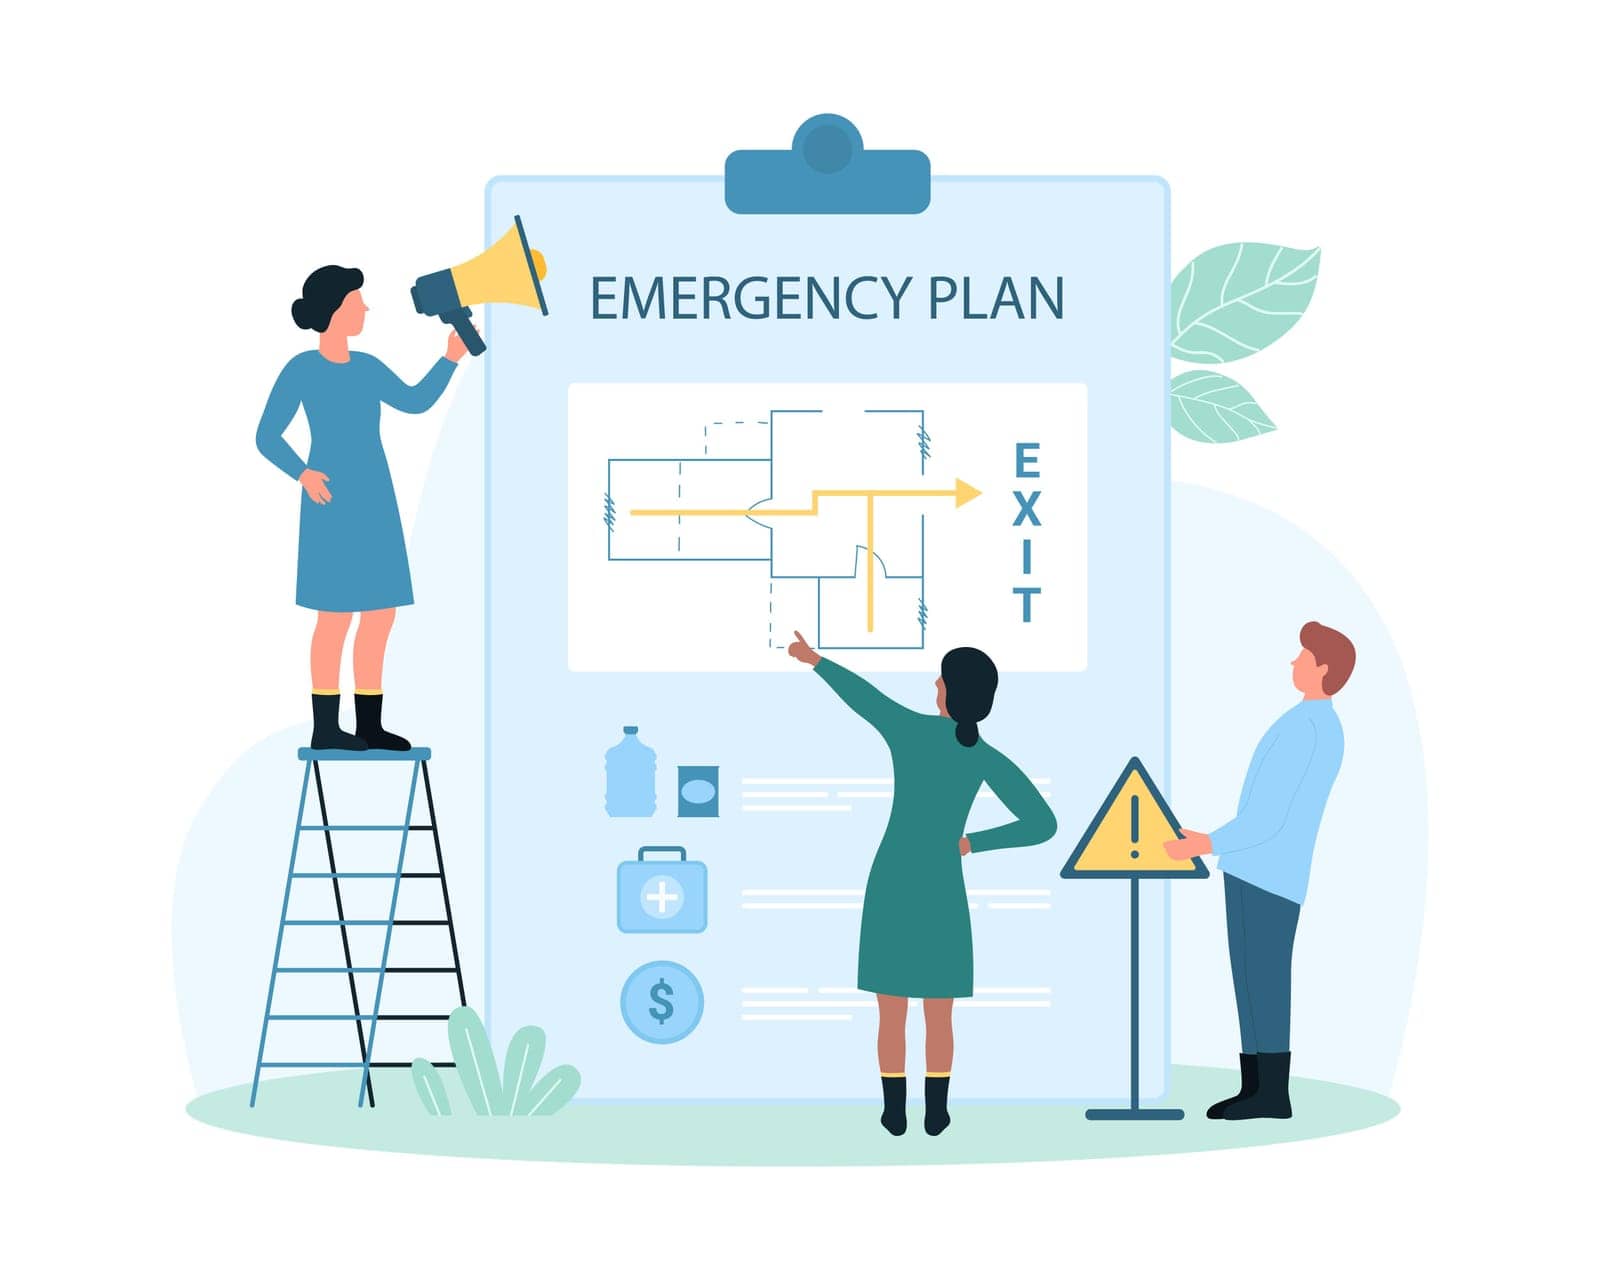 Procedure of evacuation, emergency map vector illustration. Cartoon tiny people with megaphone notice about safe exit from building in case of disasters and accidents with arrows on floor plan scheme